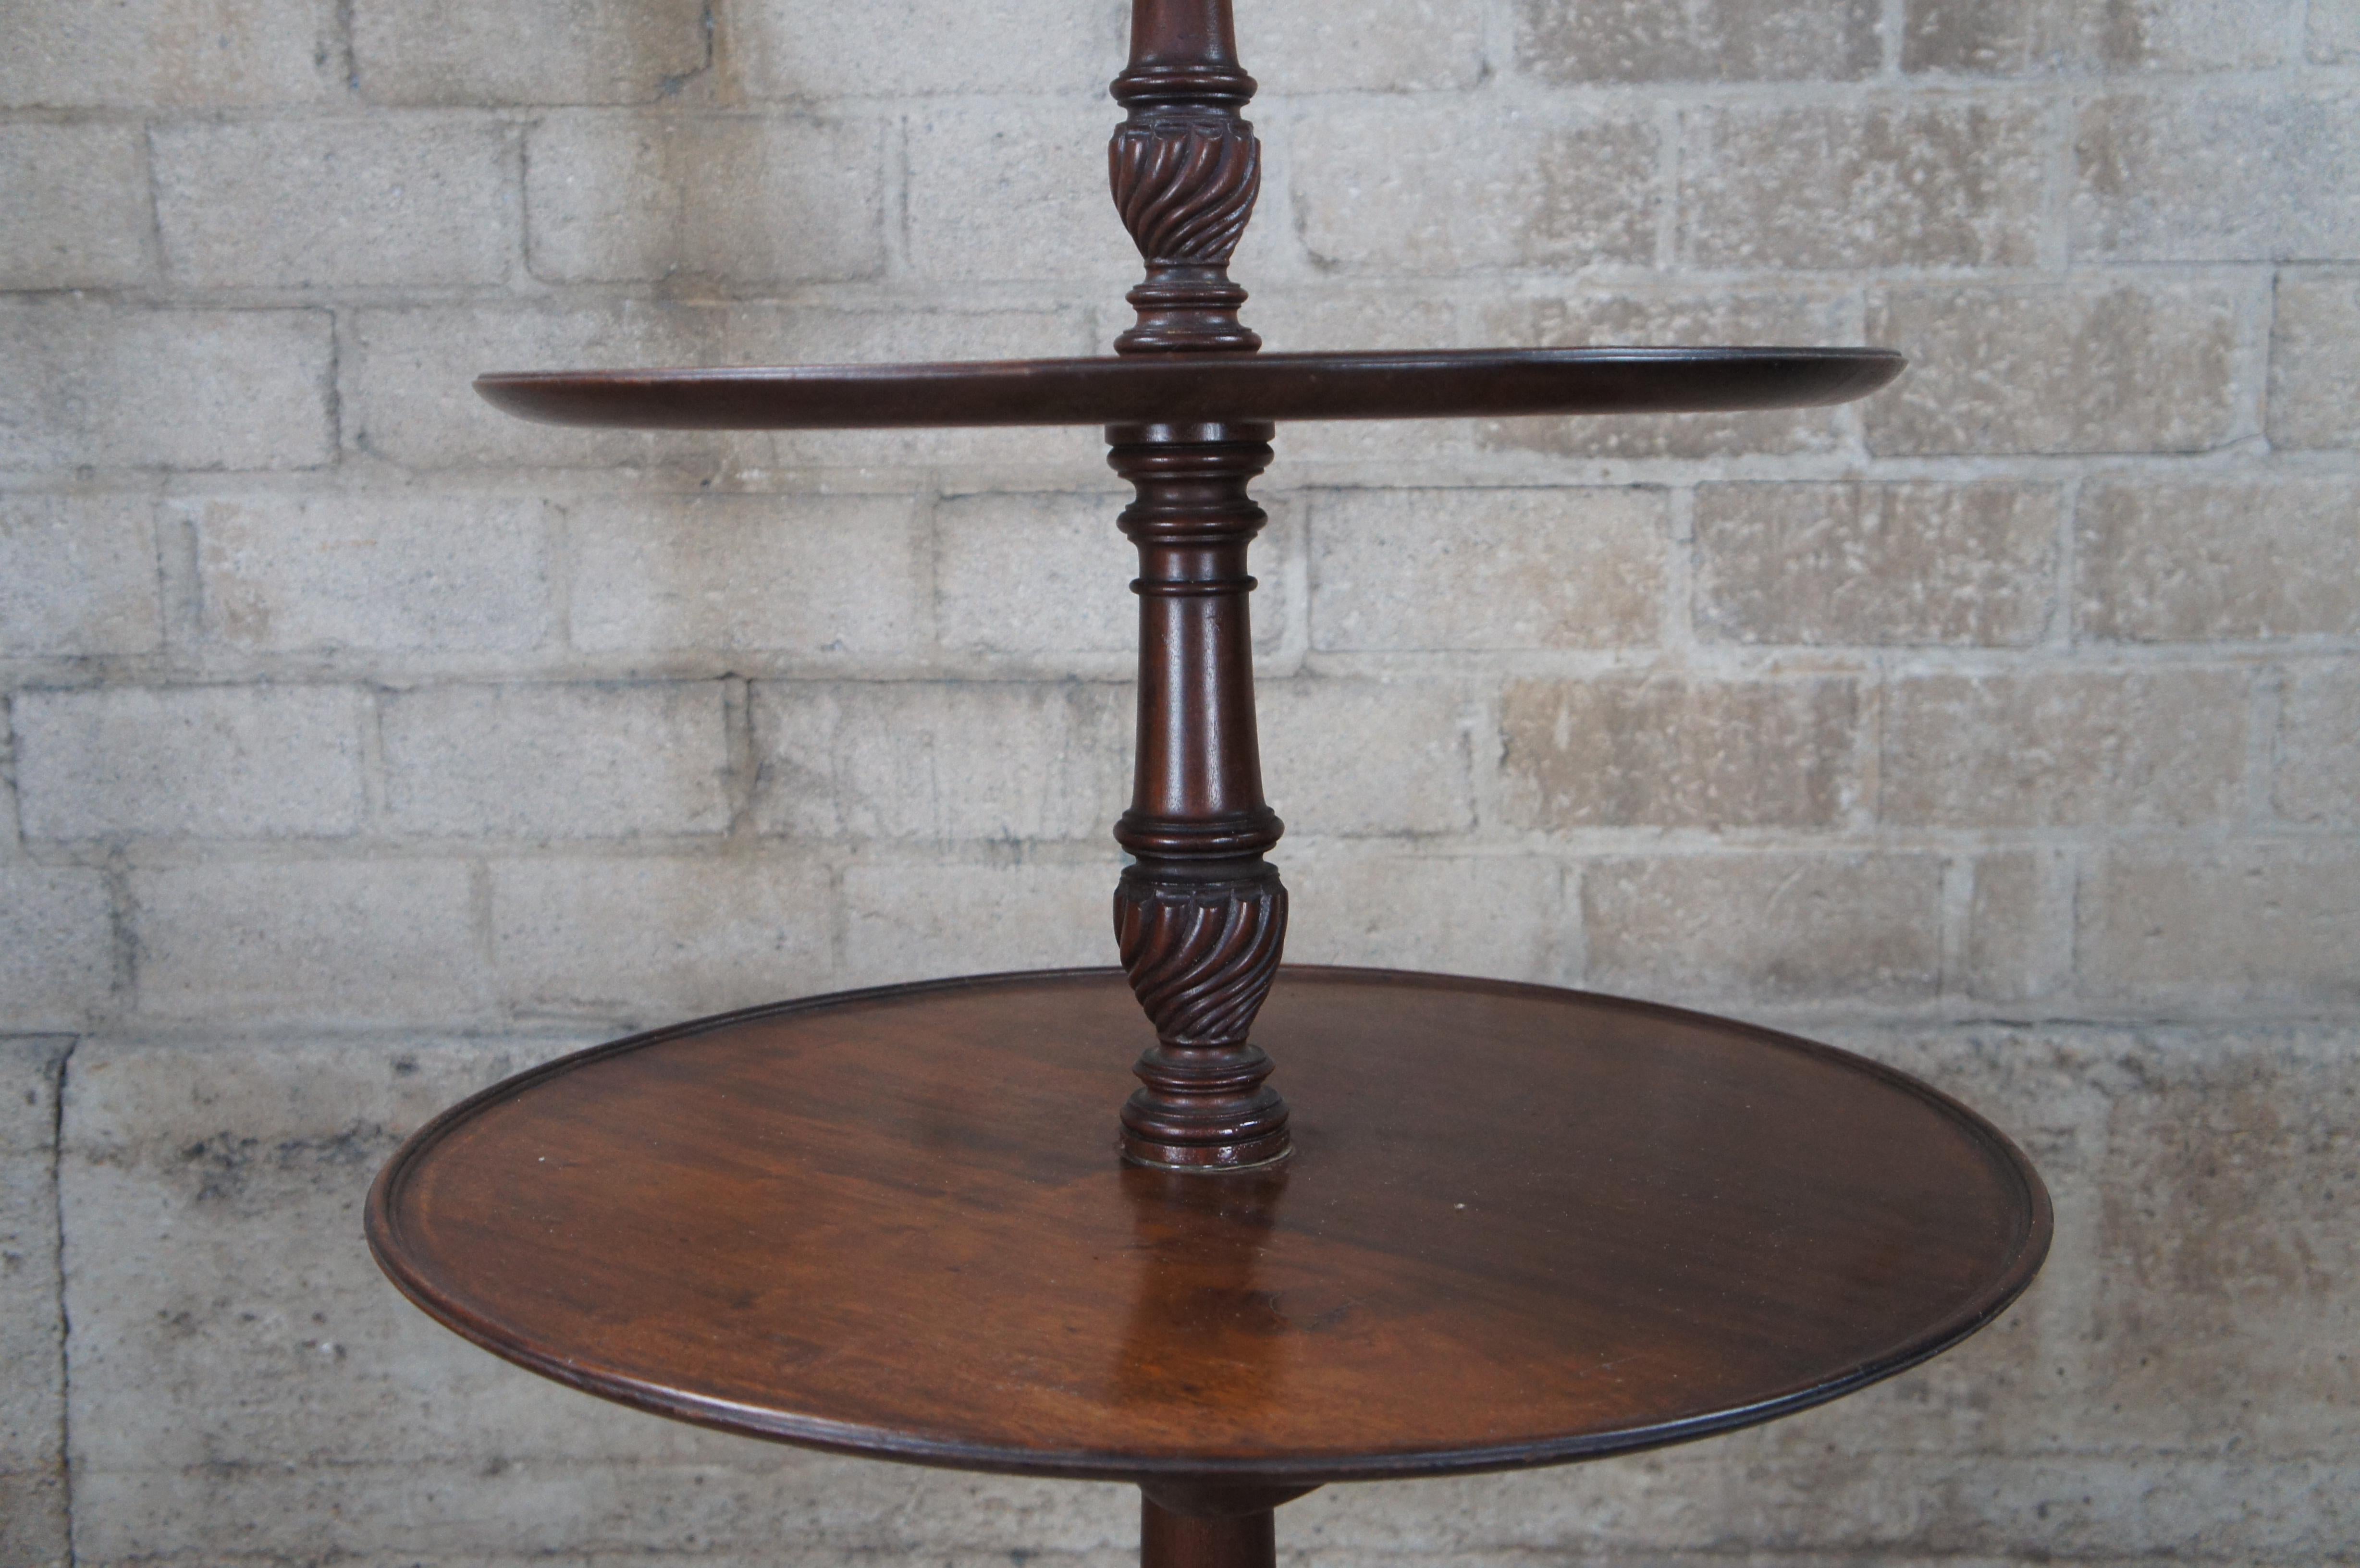 English Georgian Solid Mahogany 3 Tier Dumbwaiter Table Butler Pedestal Table For Sale 2